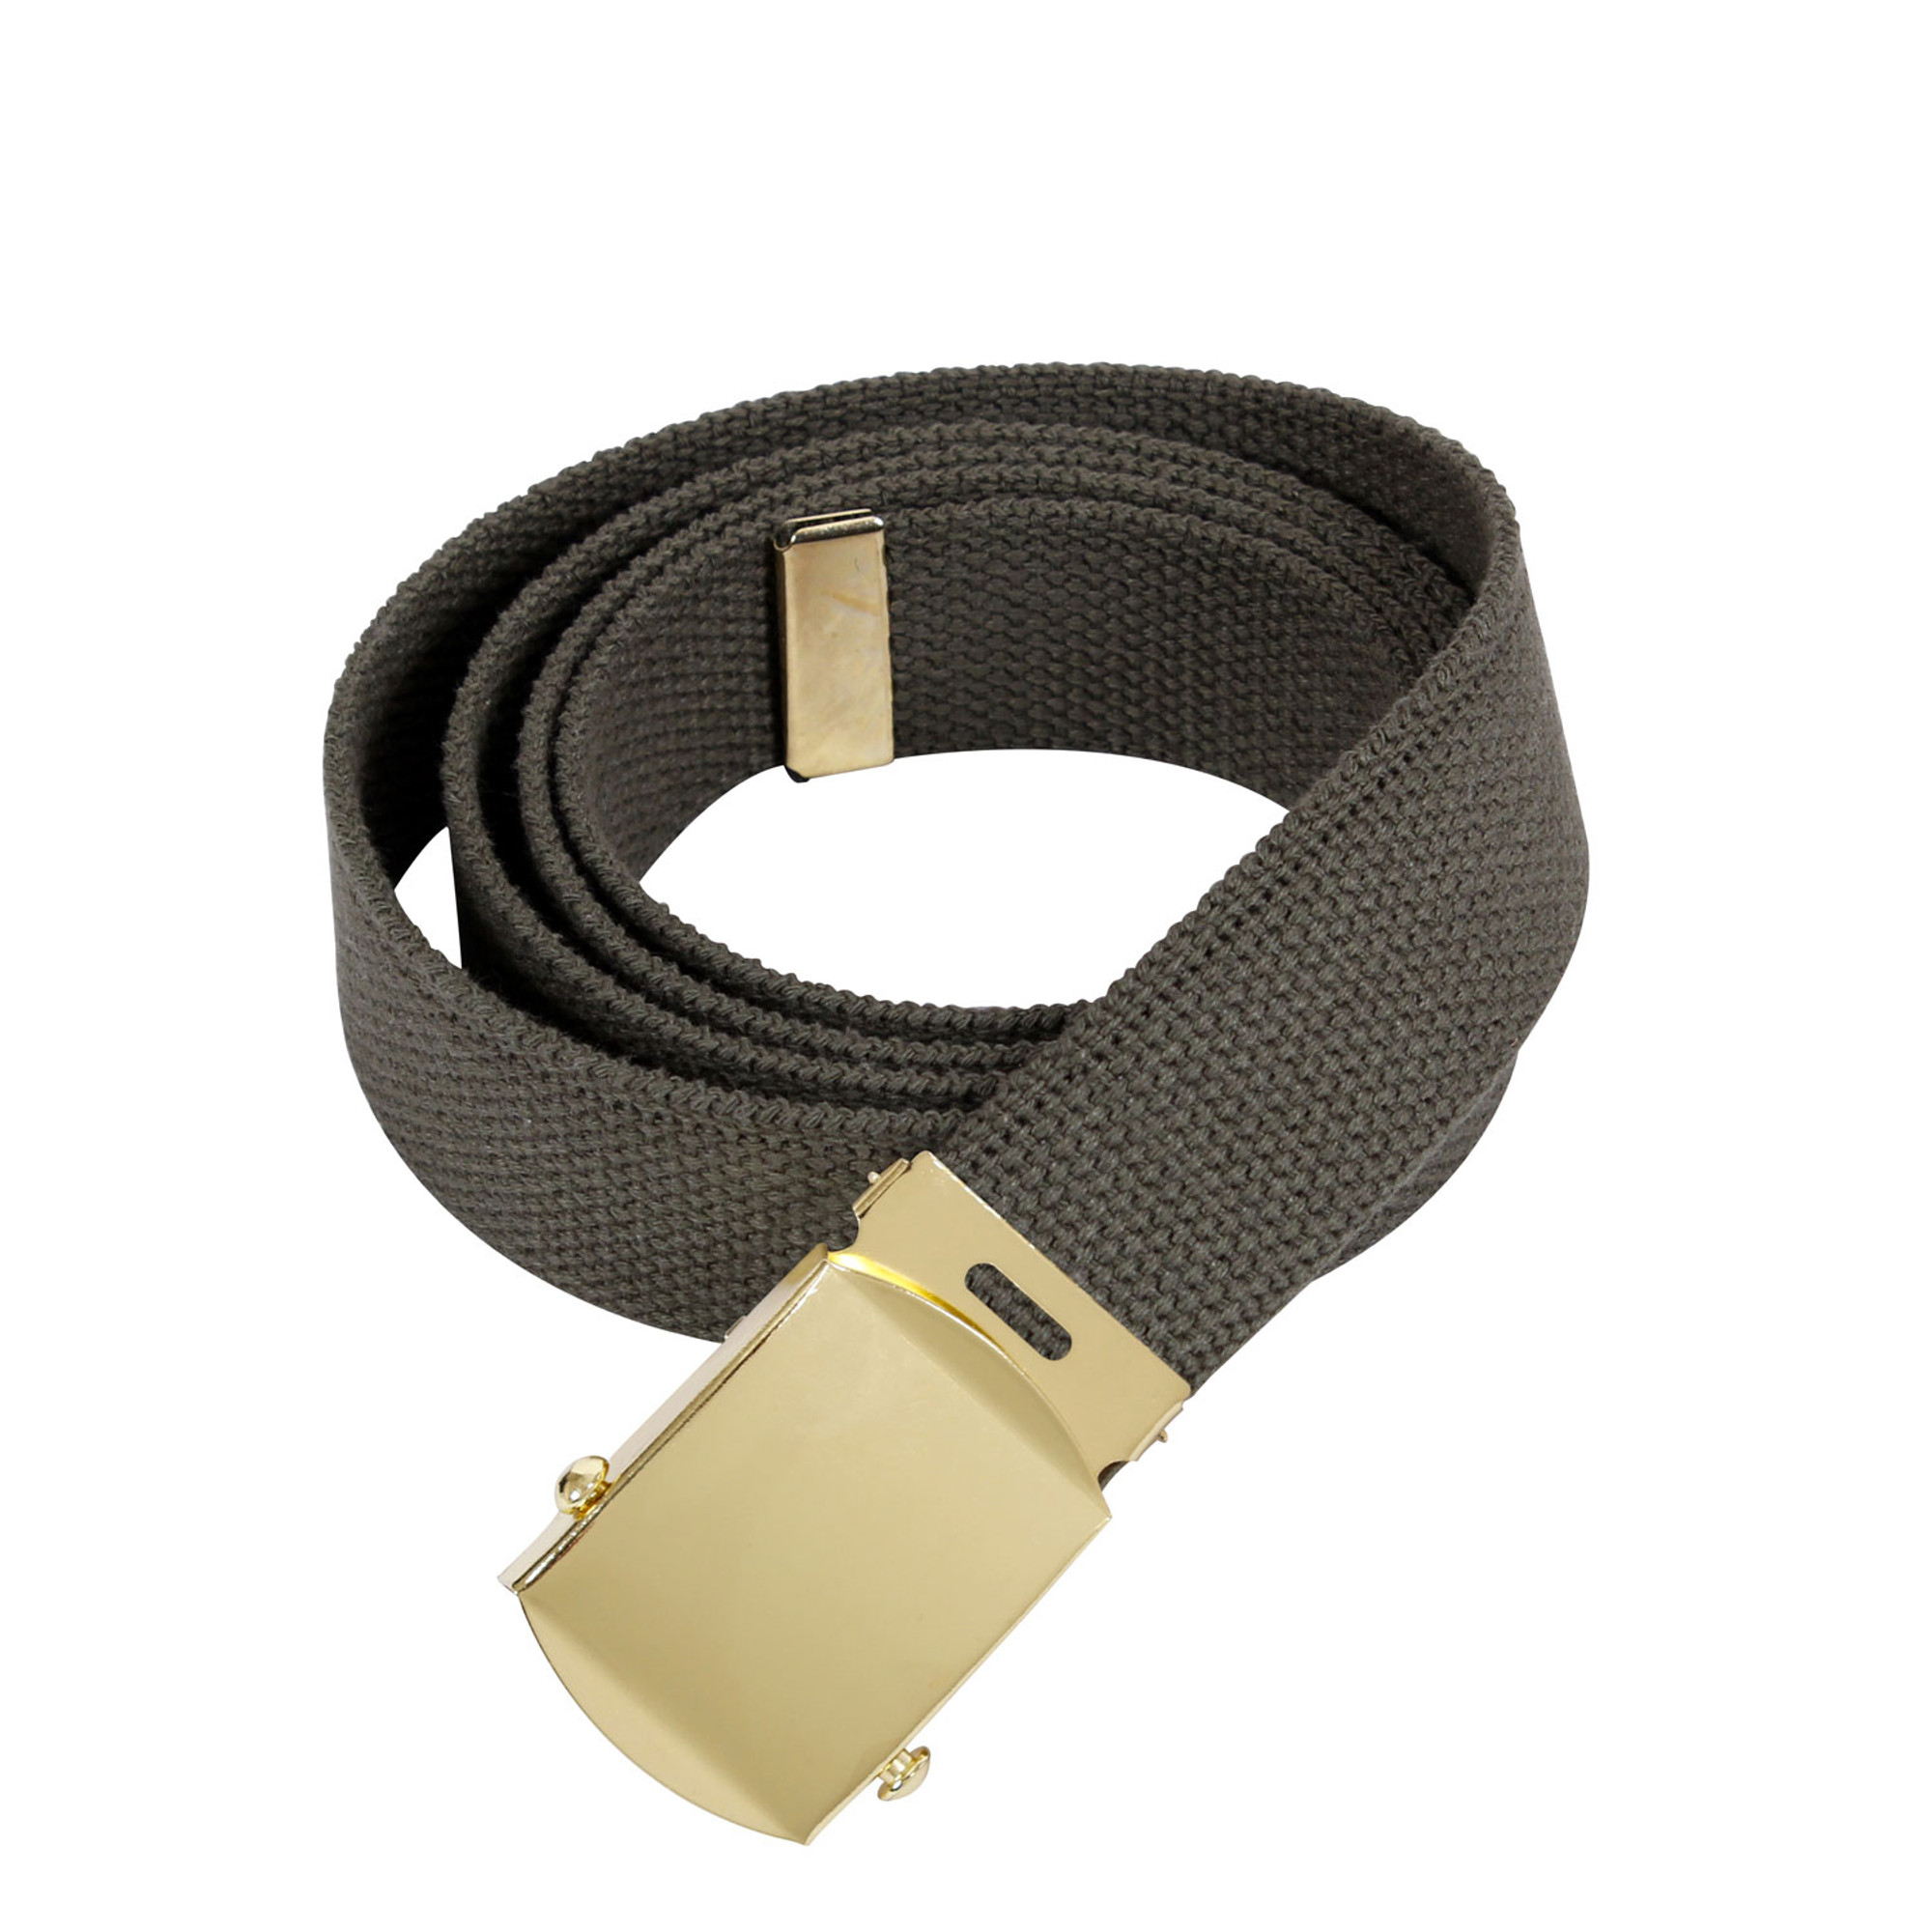 Rothco Military Web Belts - 44 Inches Long - Olive Drab/Gold